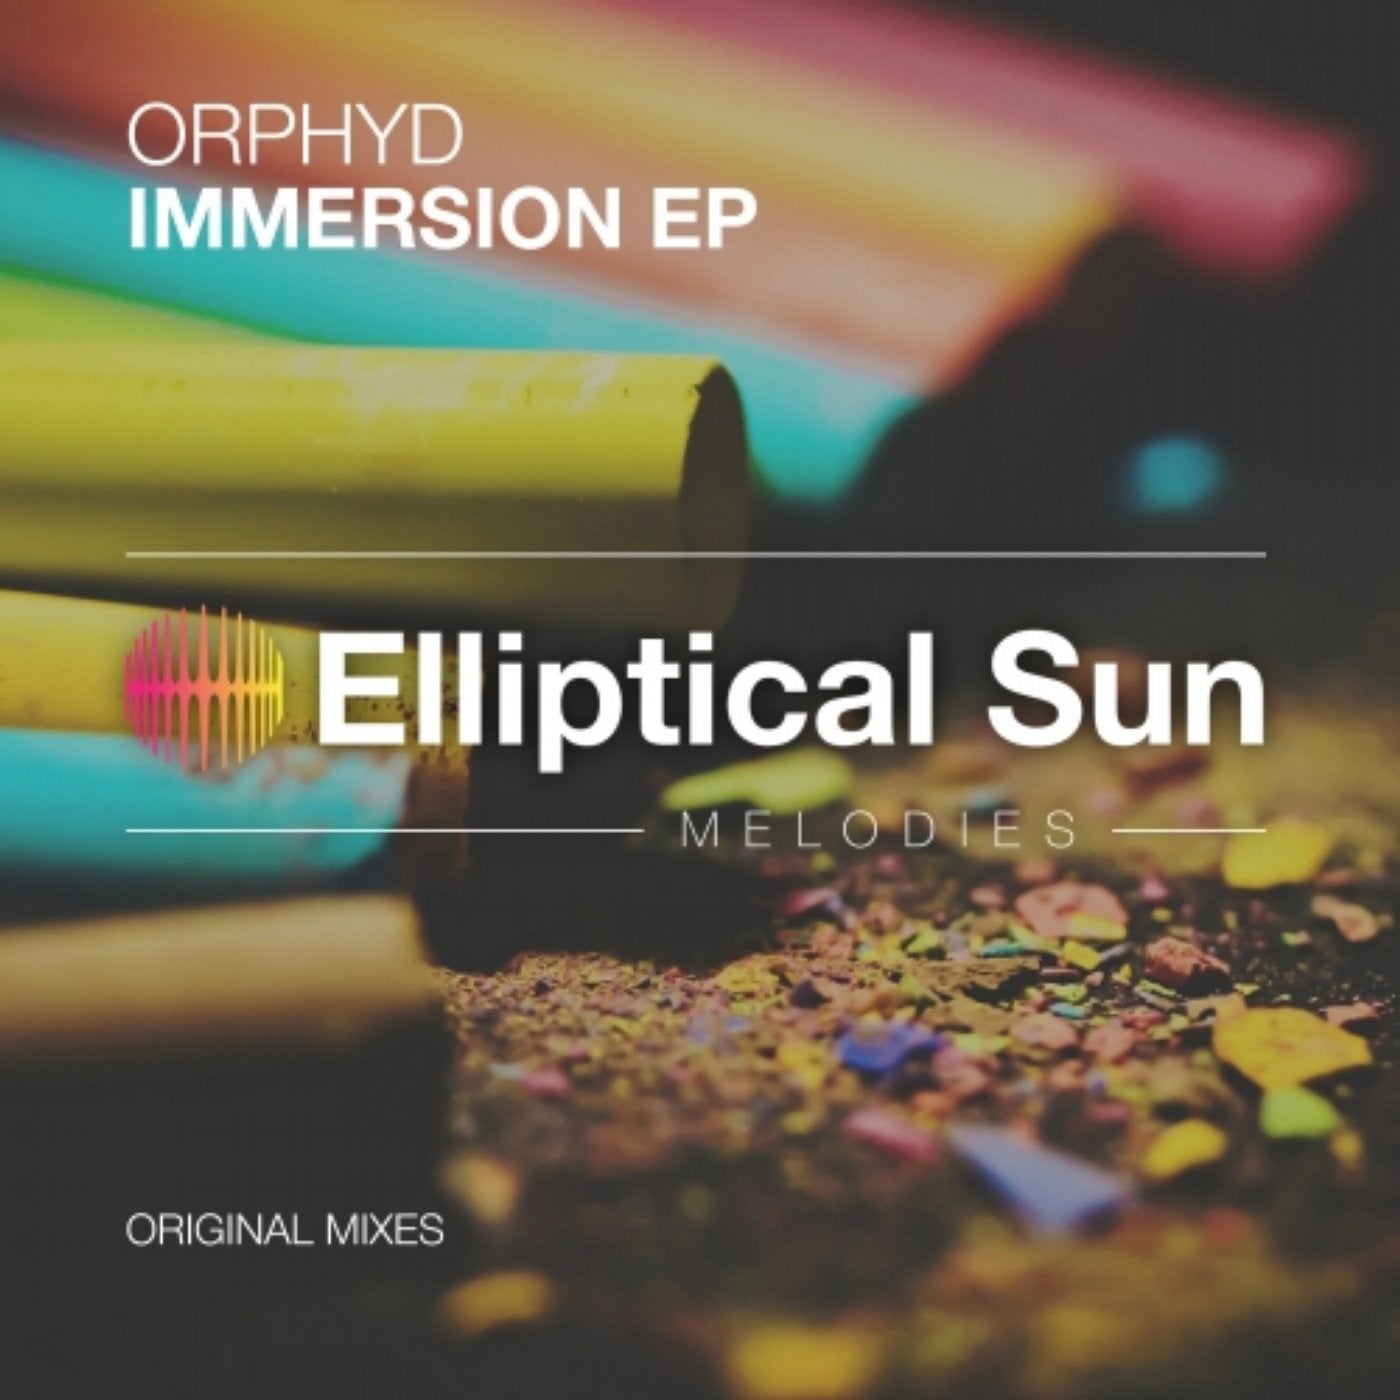 Immersion EP